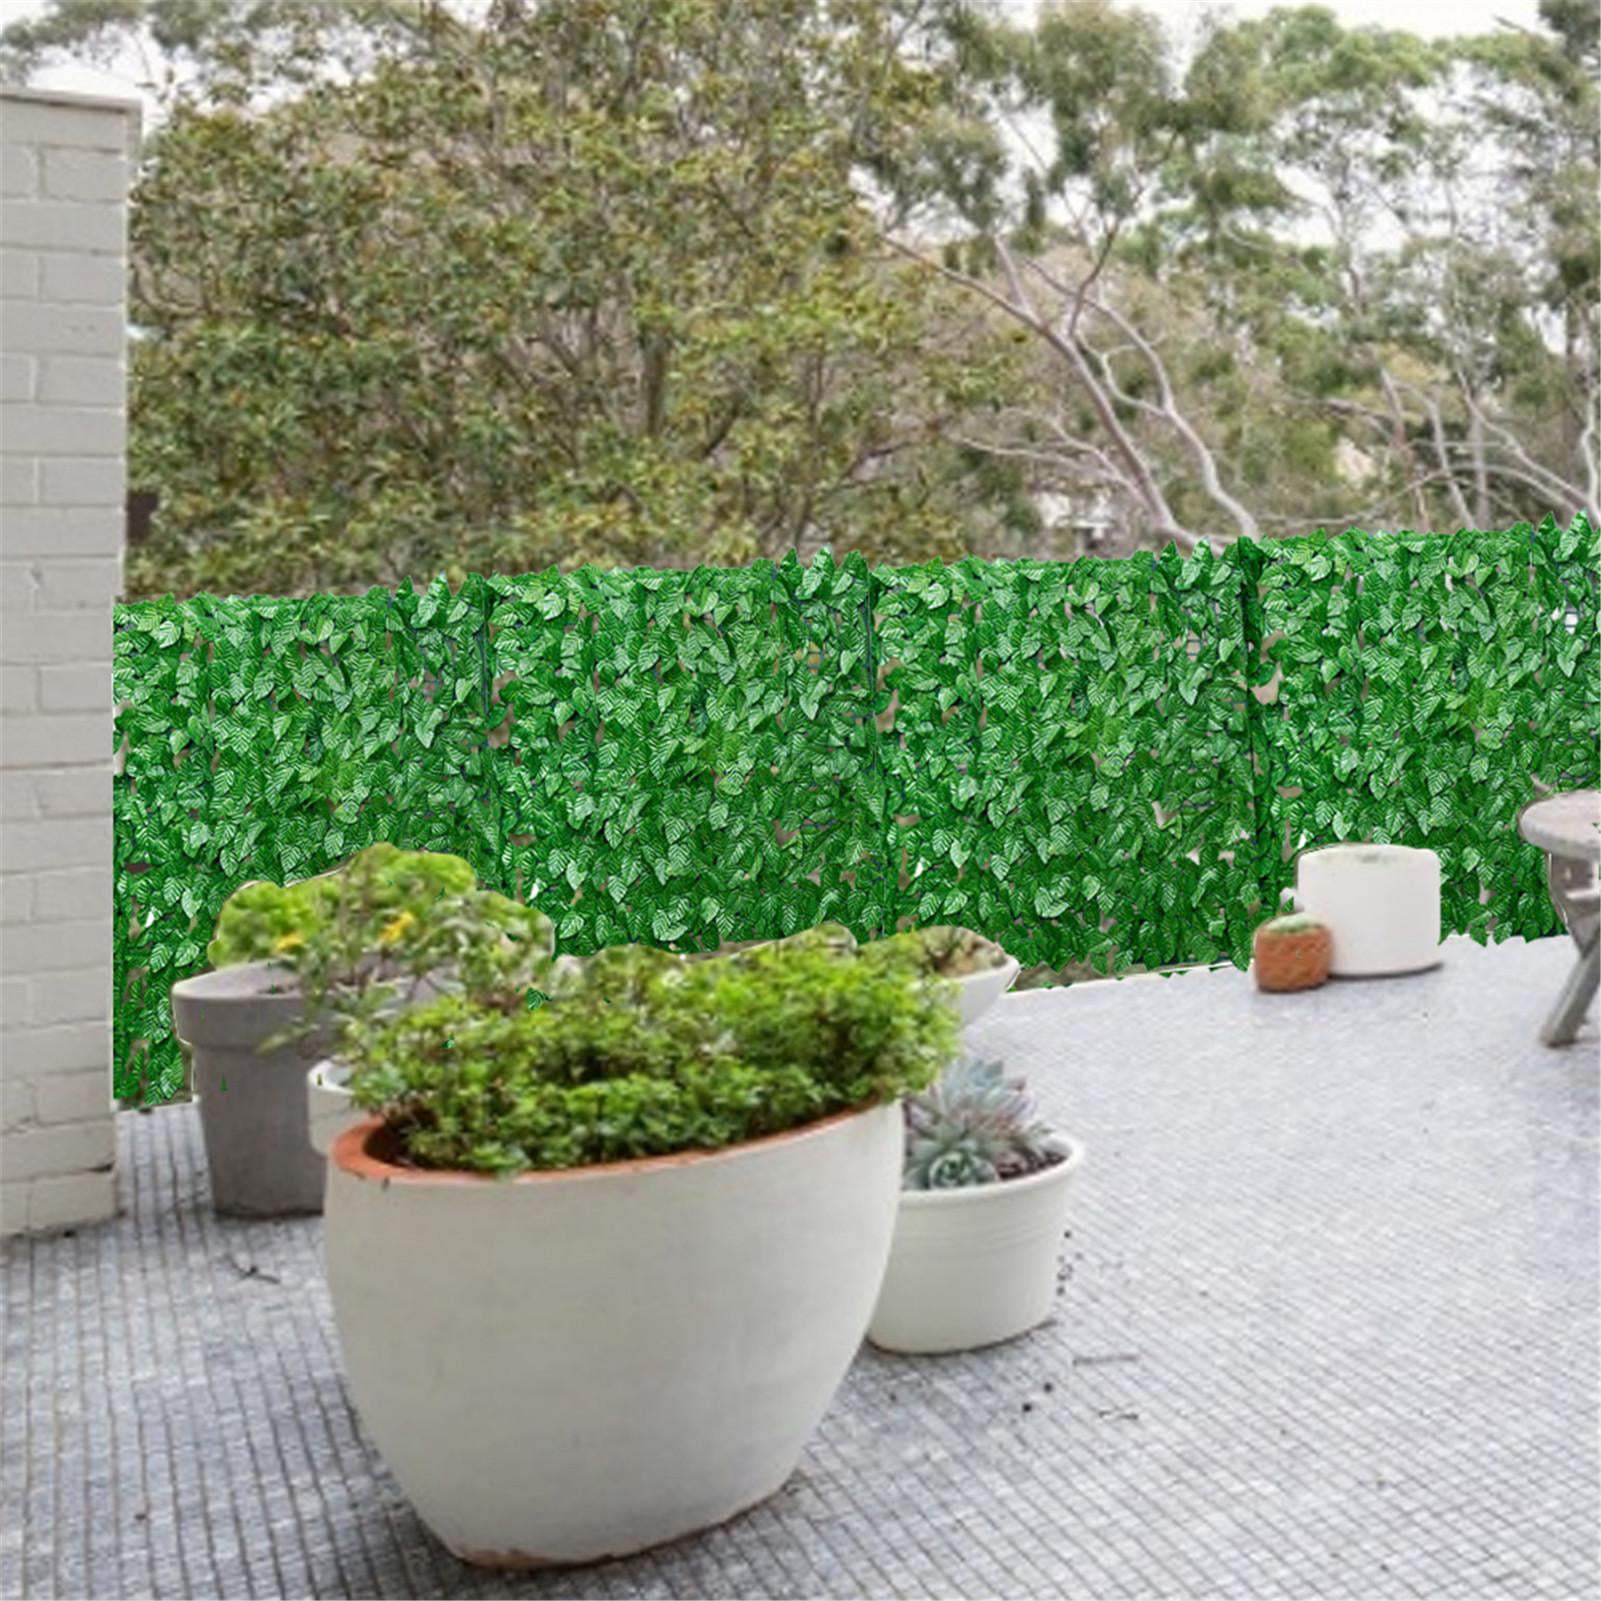 Green Leaf Fence Garden Fence Courtyard Fence Artificial Plant Hedge Fence With Flowers Realistic Artificial Ivy Leaf Trellis Fence Privacy Screening Panels For Garden Fence Screening Garden Fen